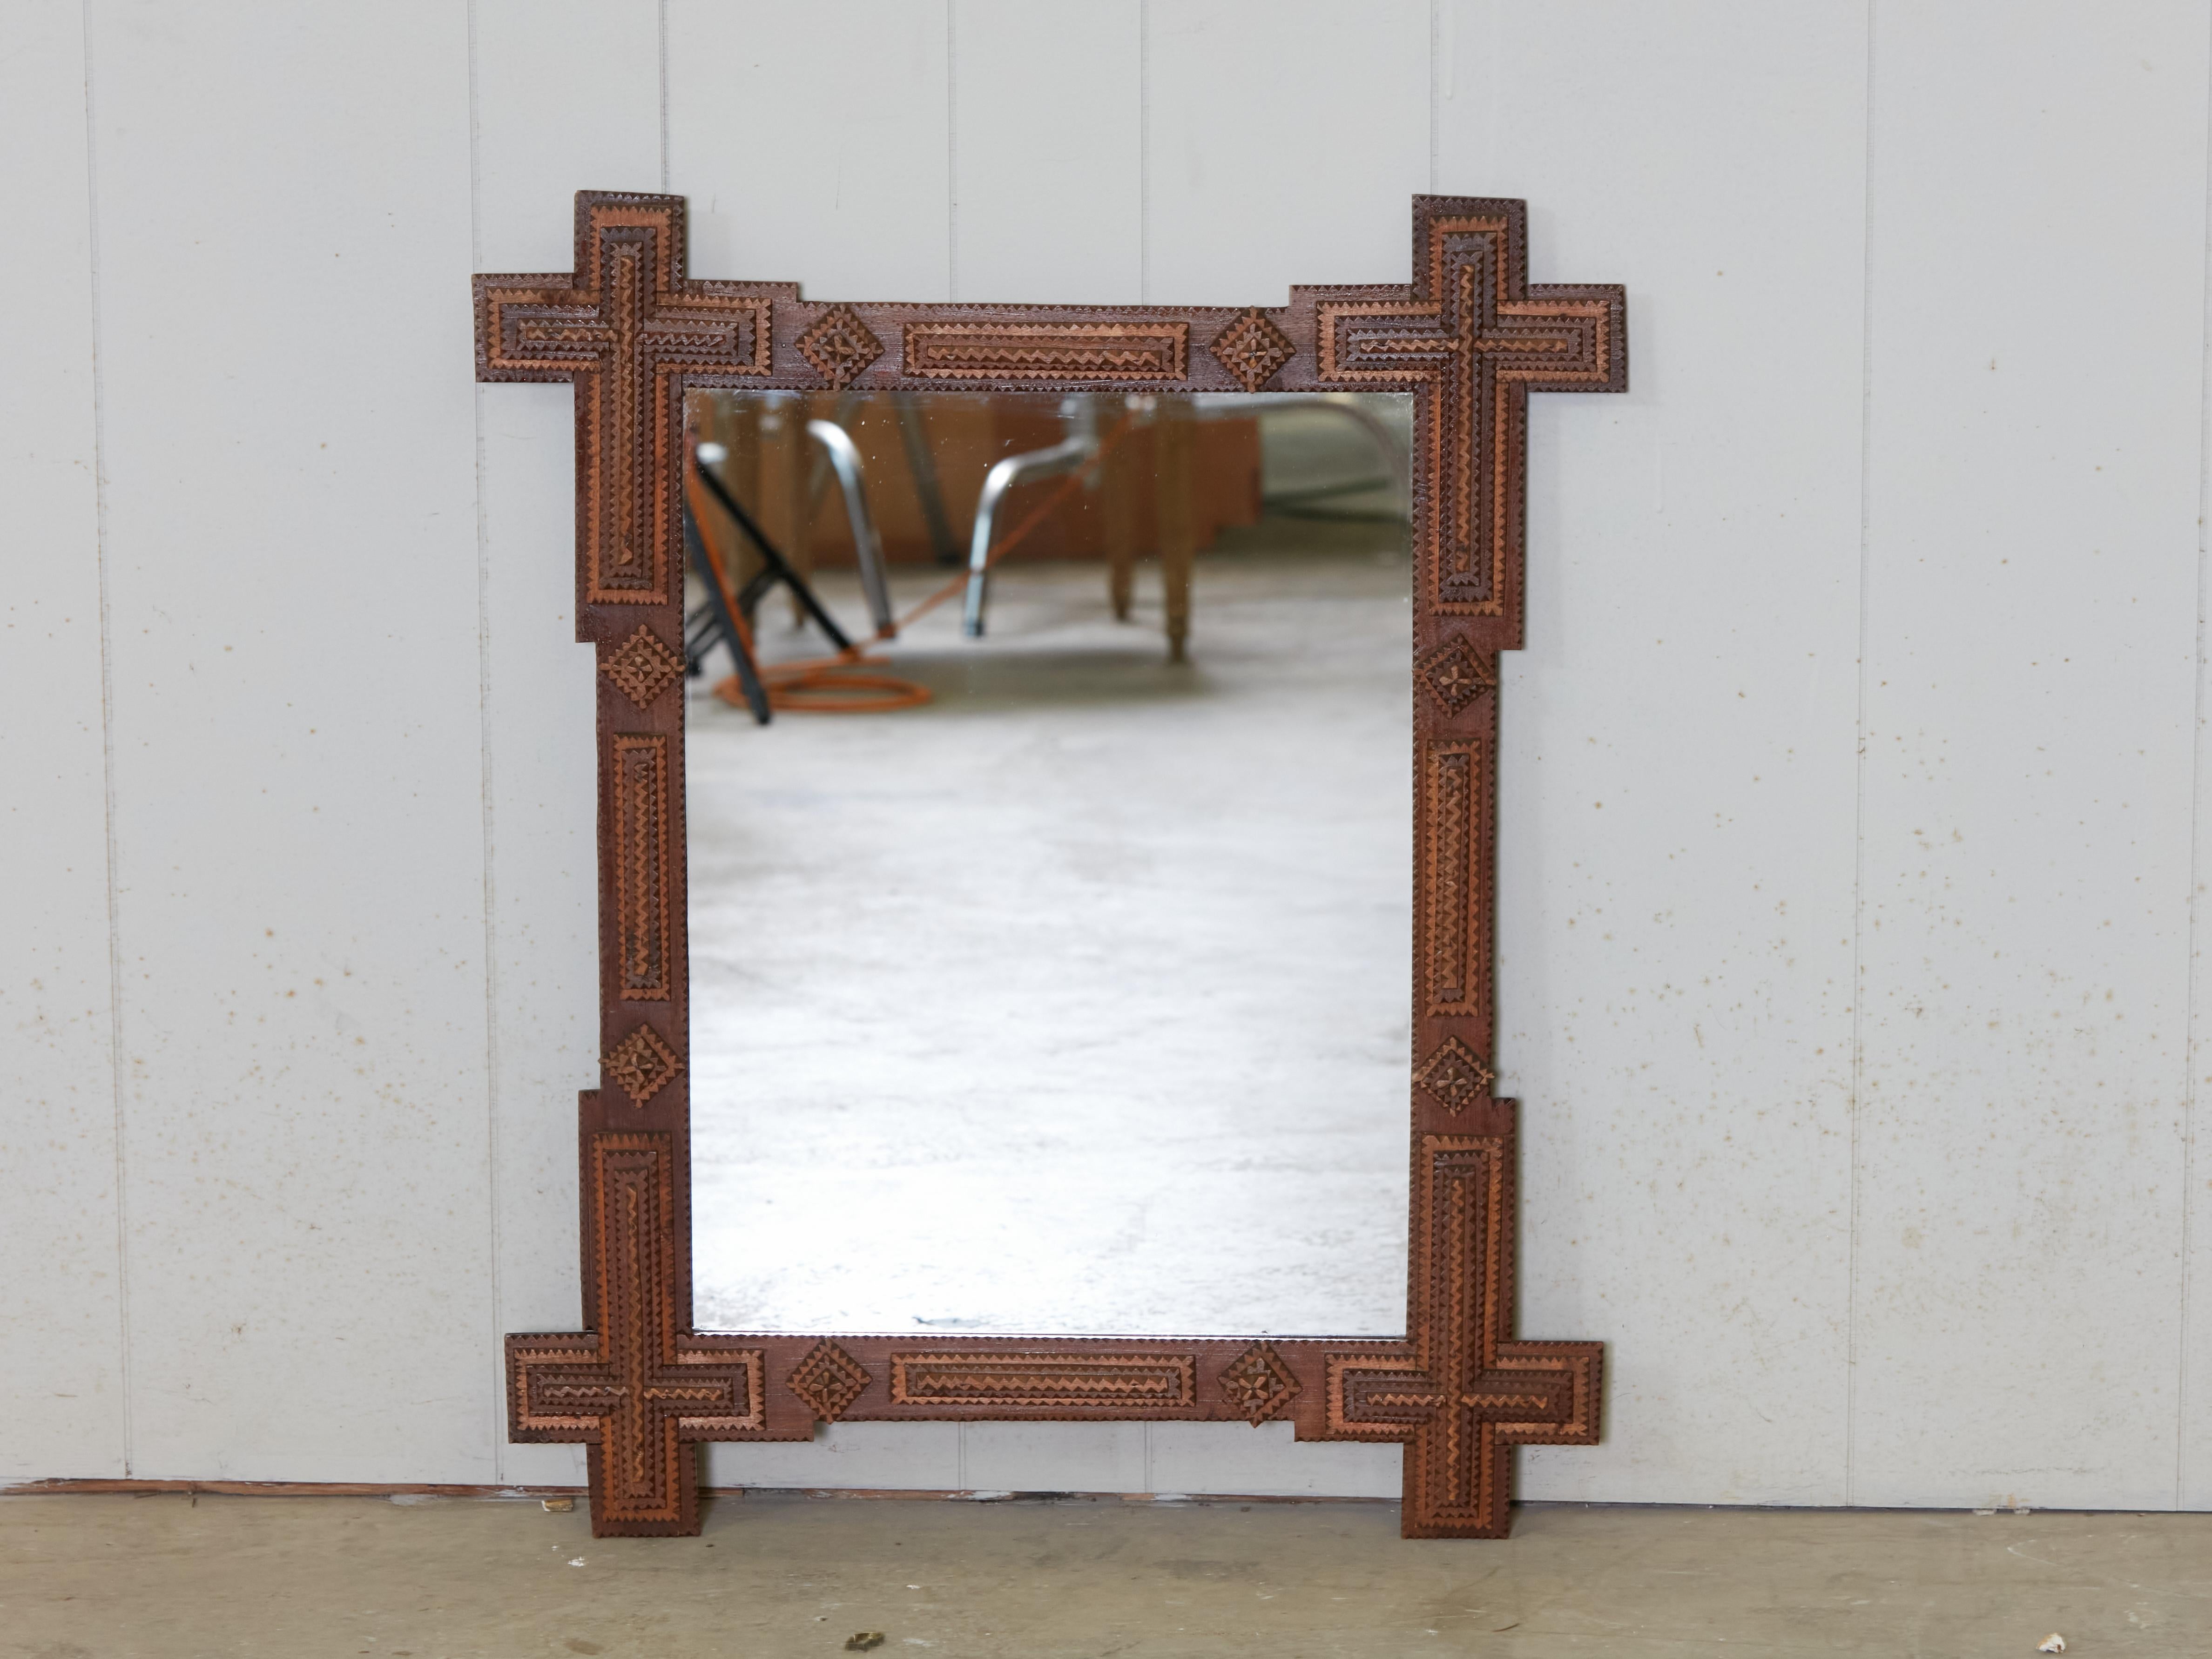 A French Turn of the century Tramp Art hand-carved mirror from the early 20th century, with intersecting corners, raised geometric motifs and brown patina. Created in France during the Turn of the Century which saw the transition between the 19th to